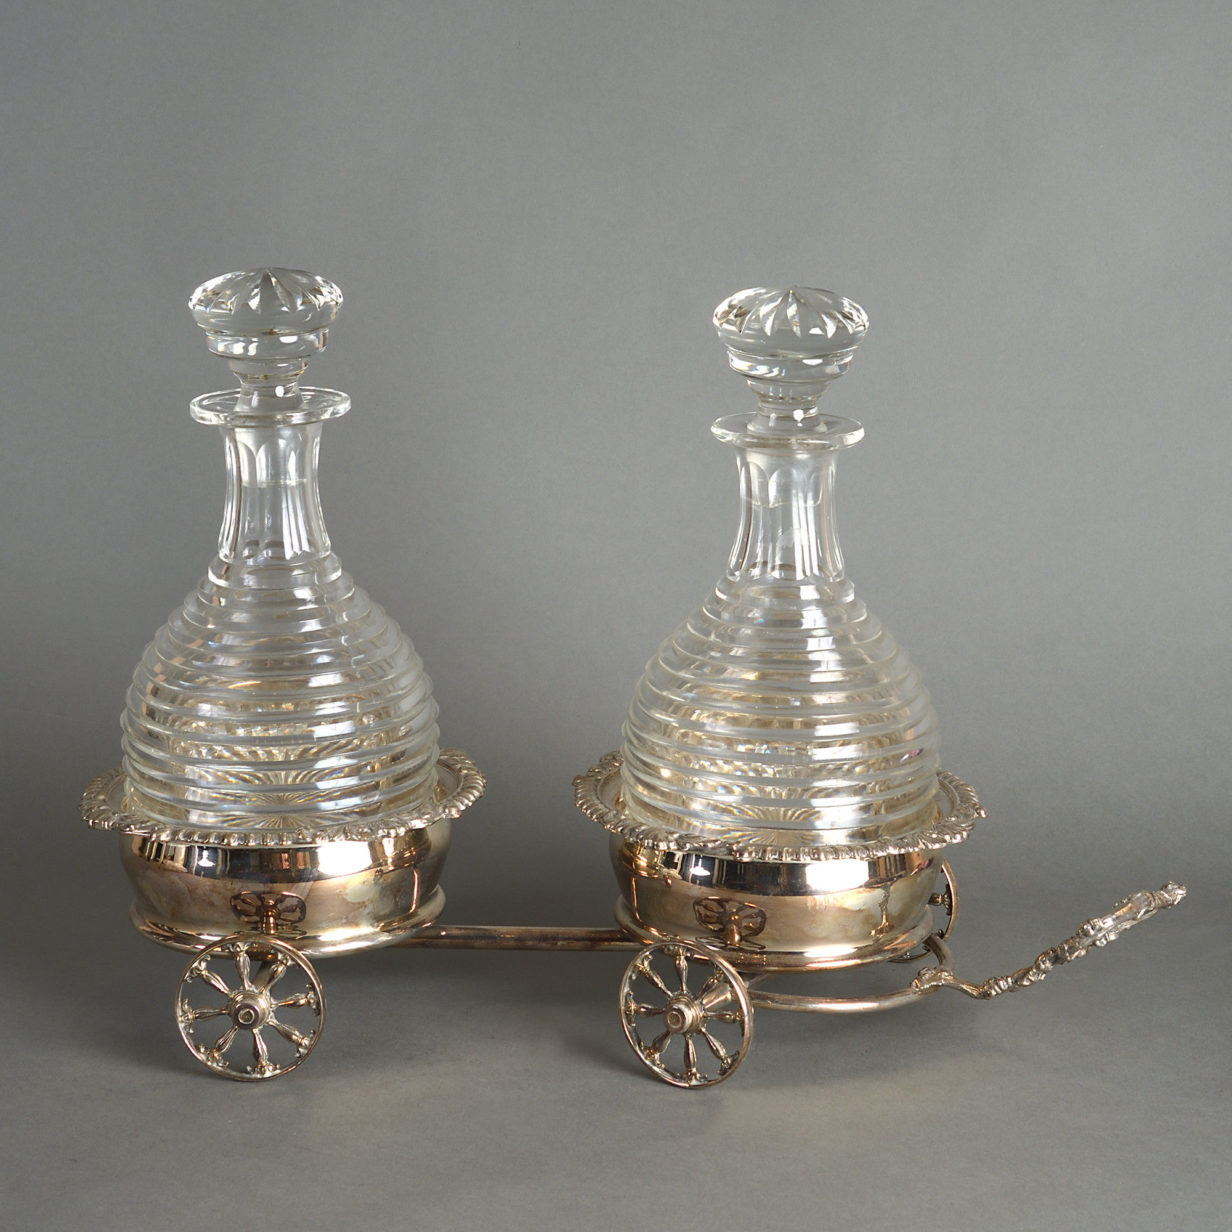 19th century pair of cut glass crystal decanters